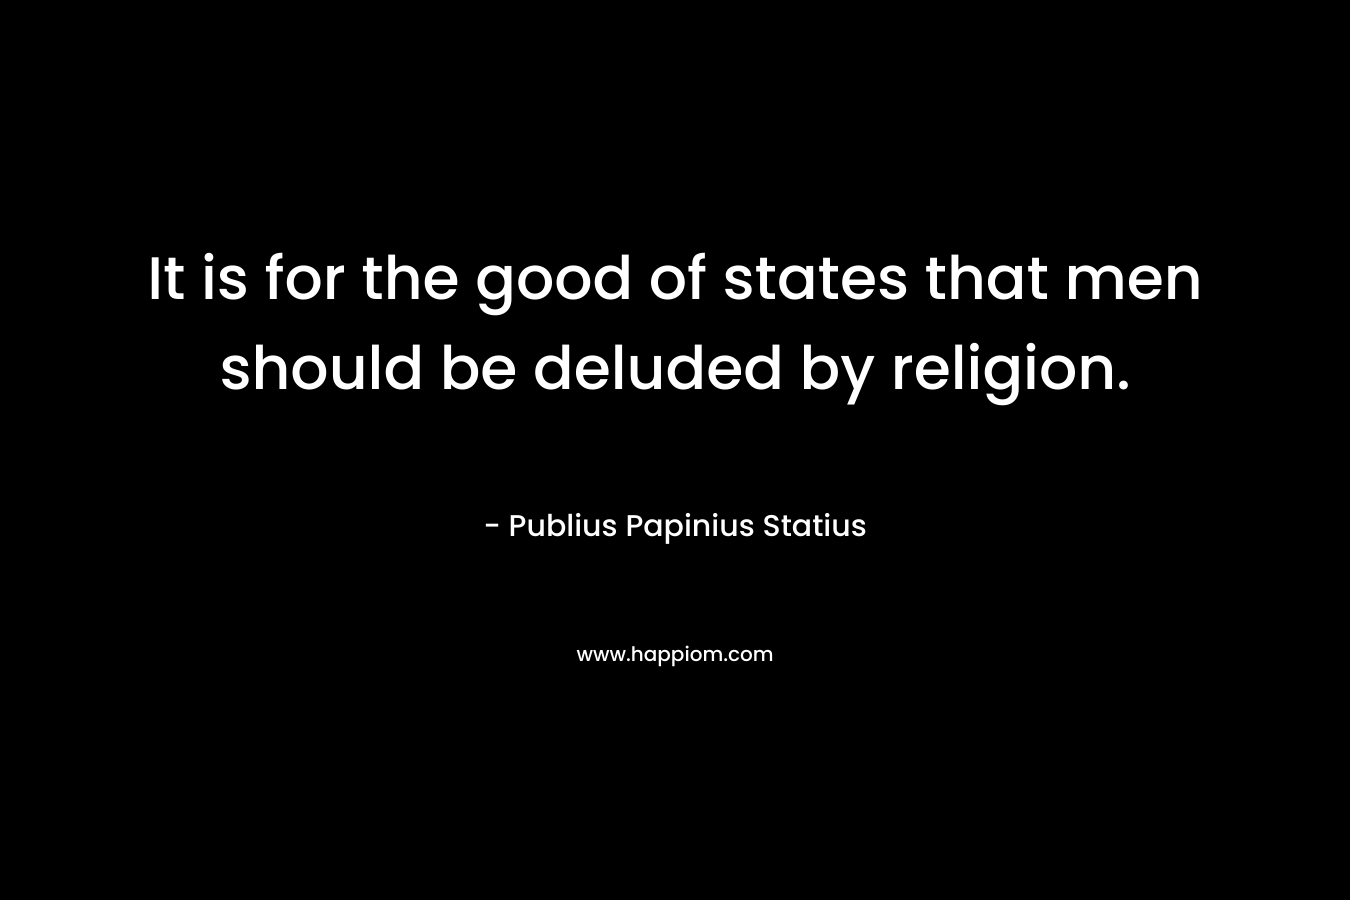 It is for the good of states that men should be deluded by religion.